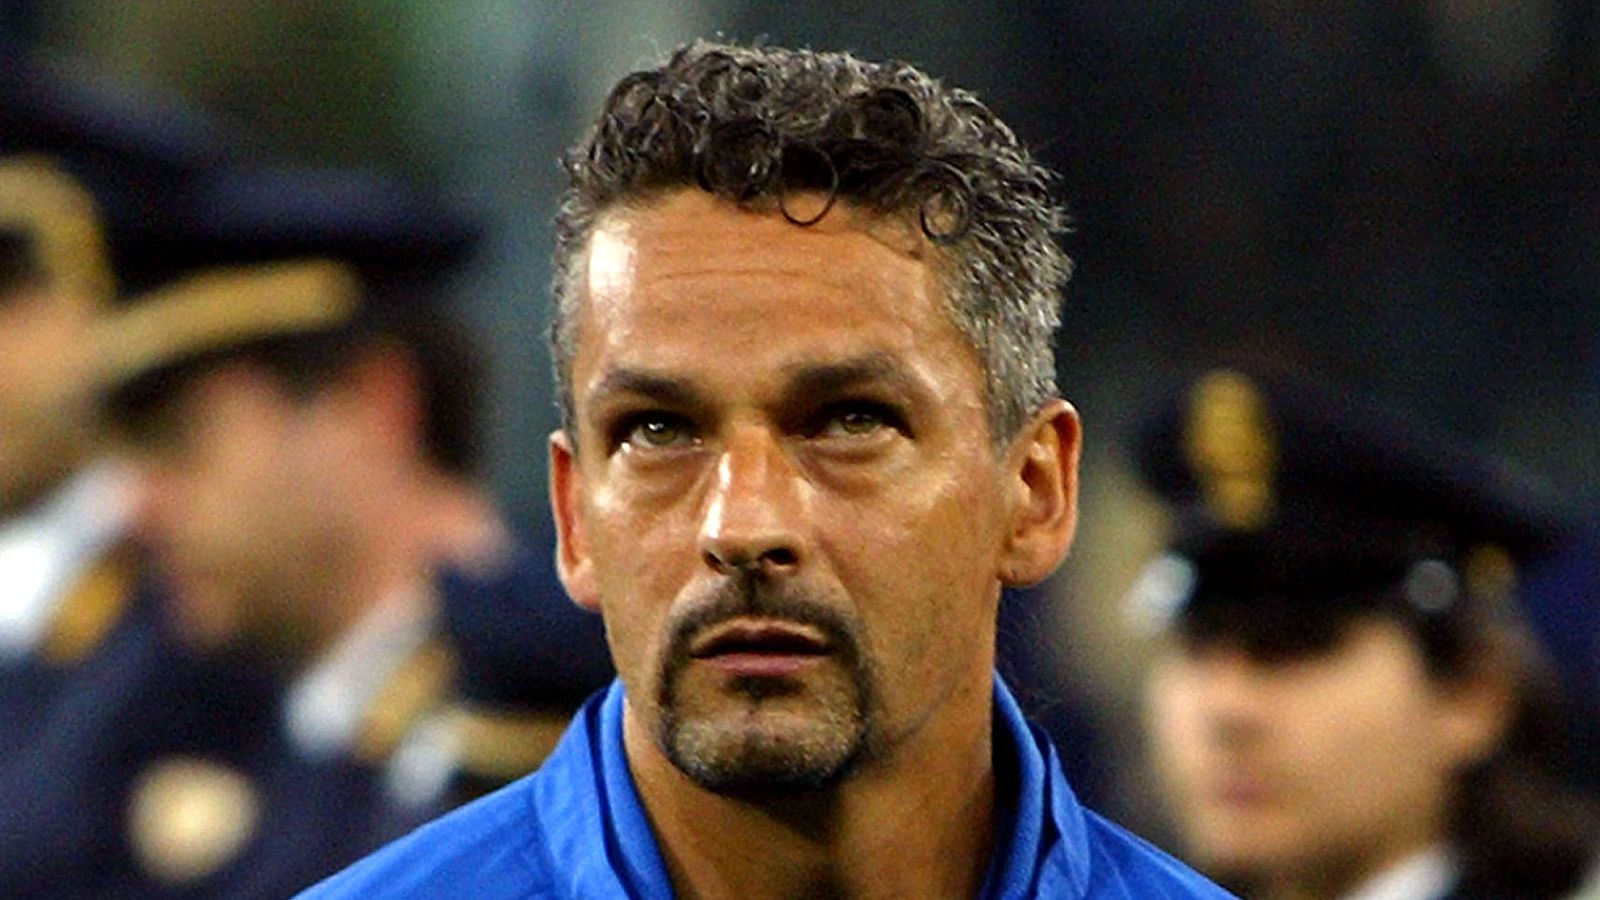 Roberto Baggio: Former Italian football star robbed at gunpoint while watching Italy-Spain game